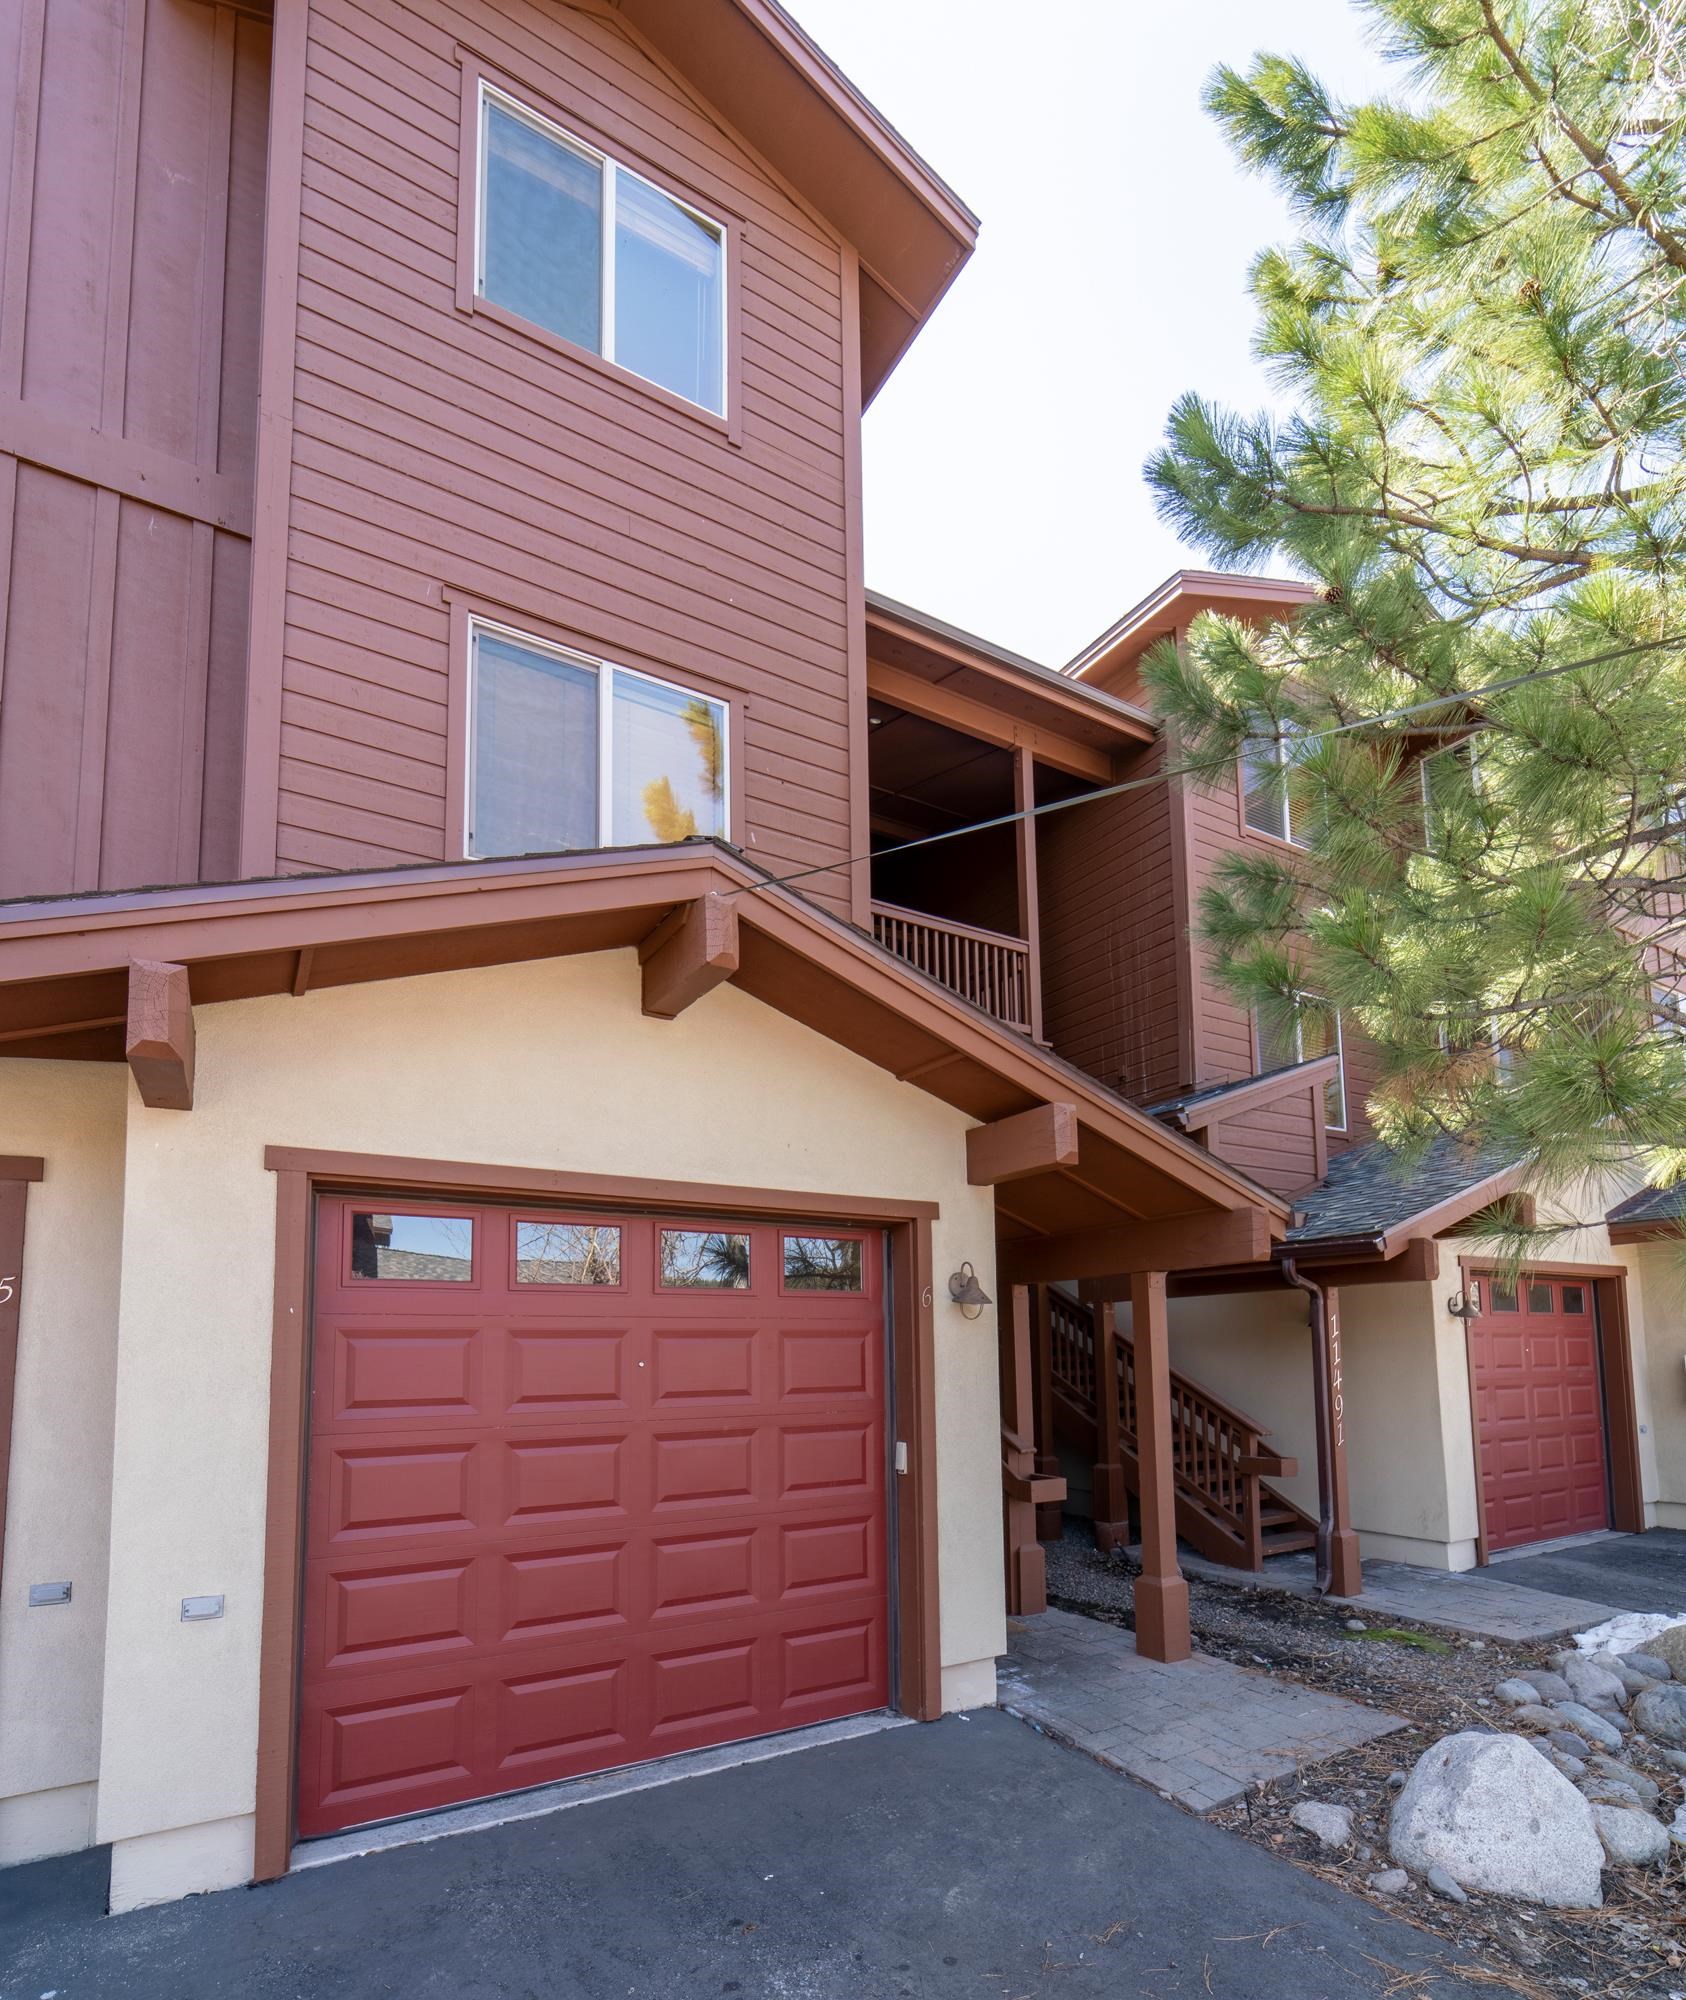 Image for 11491 Dolomite Way, Truckee, CA 96161